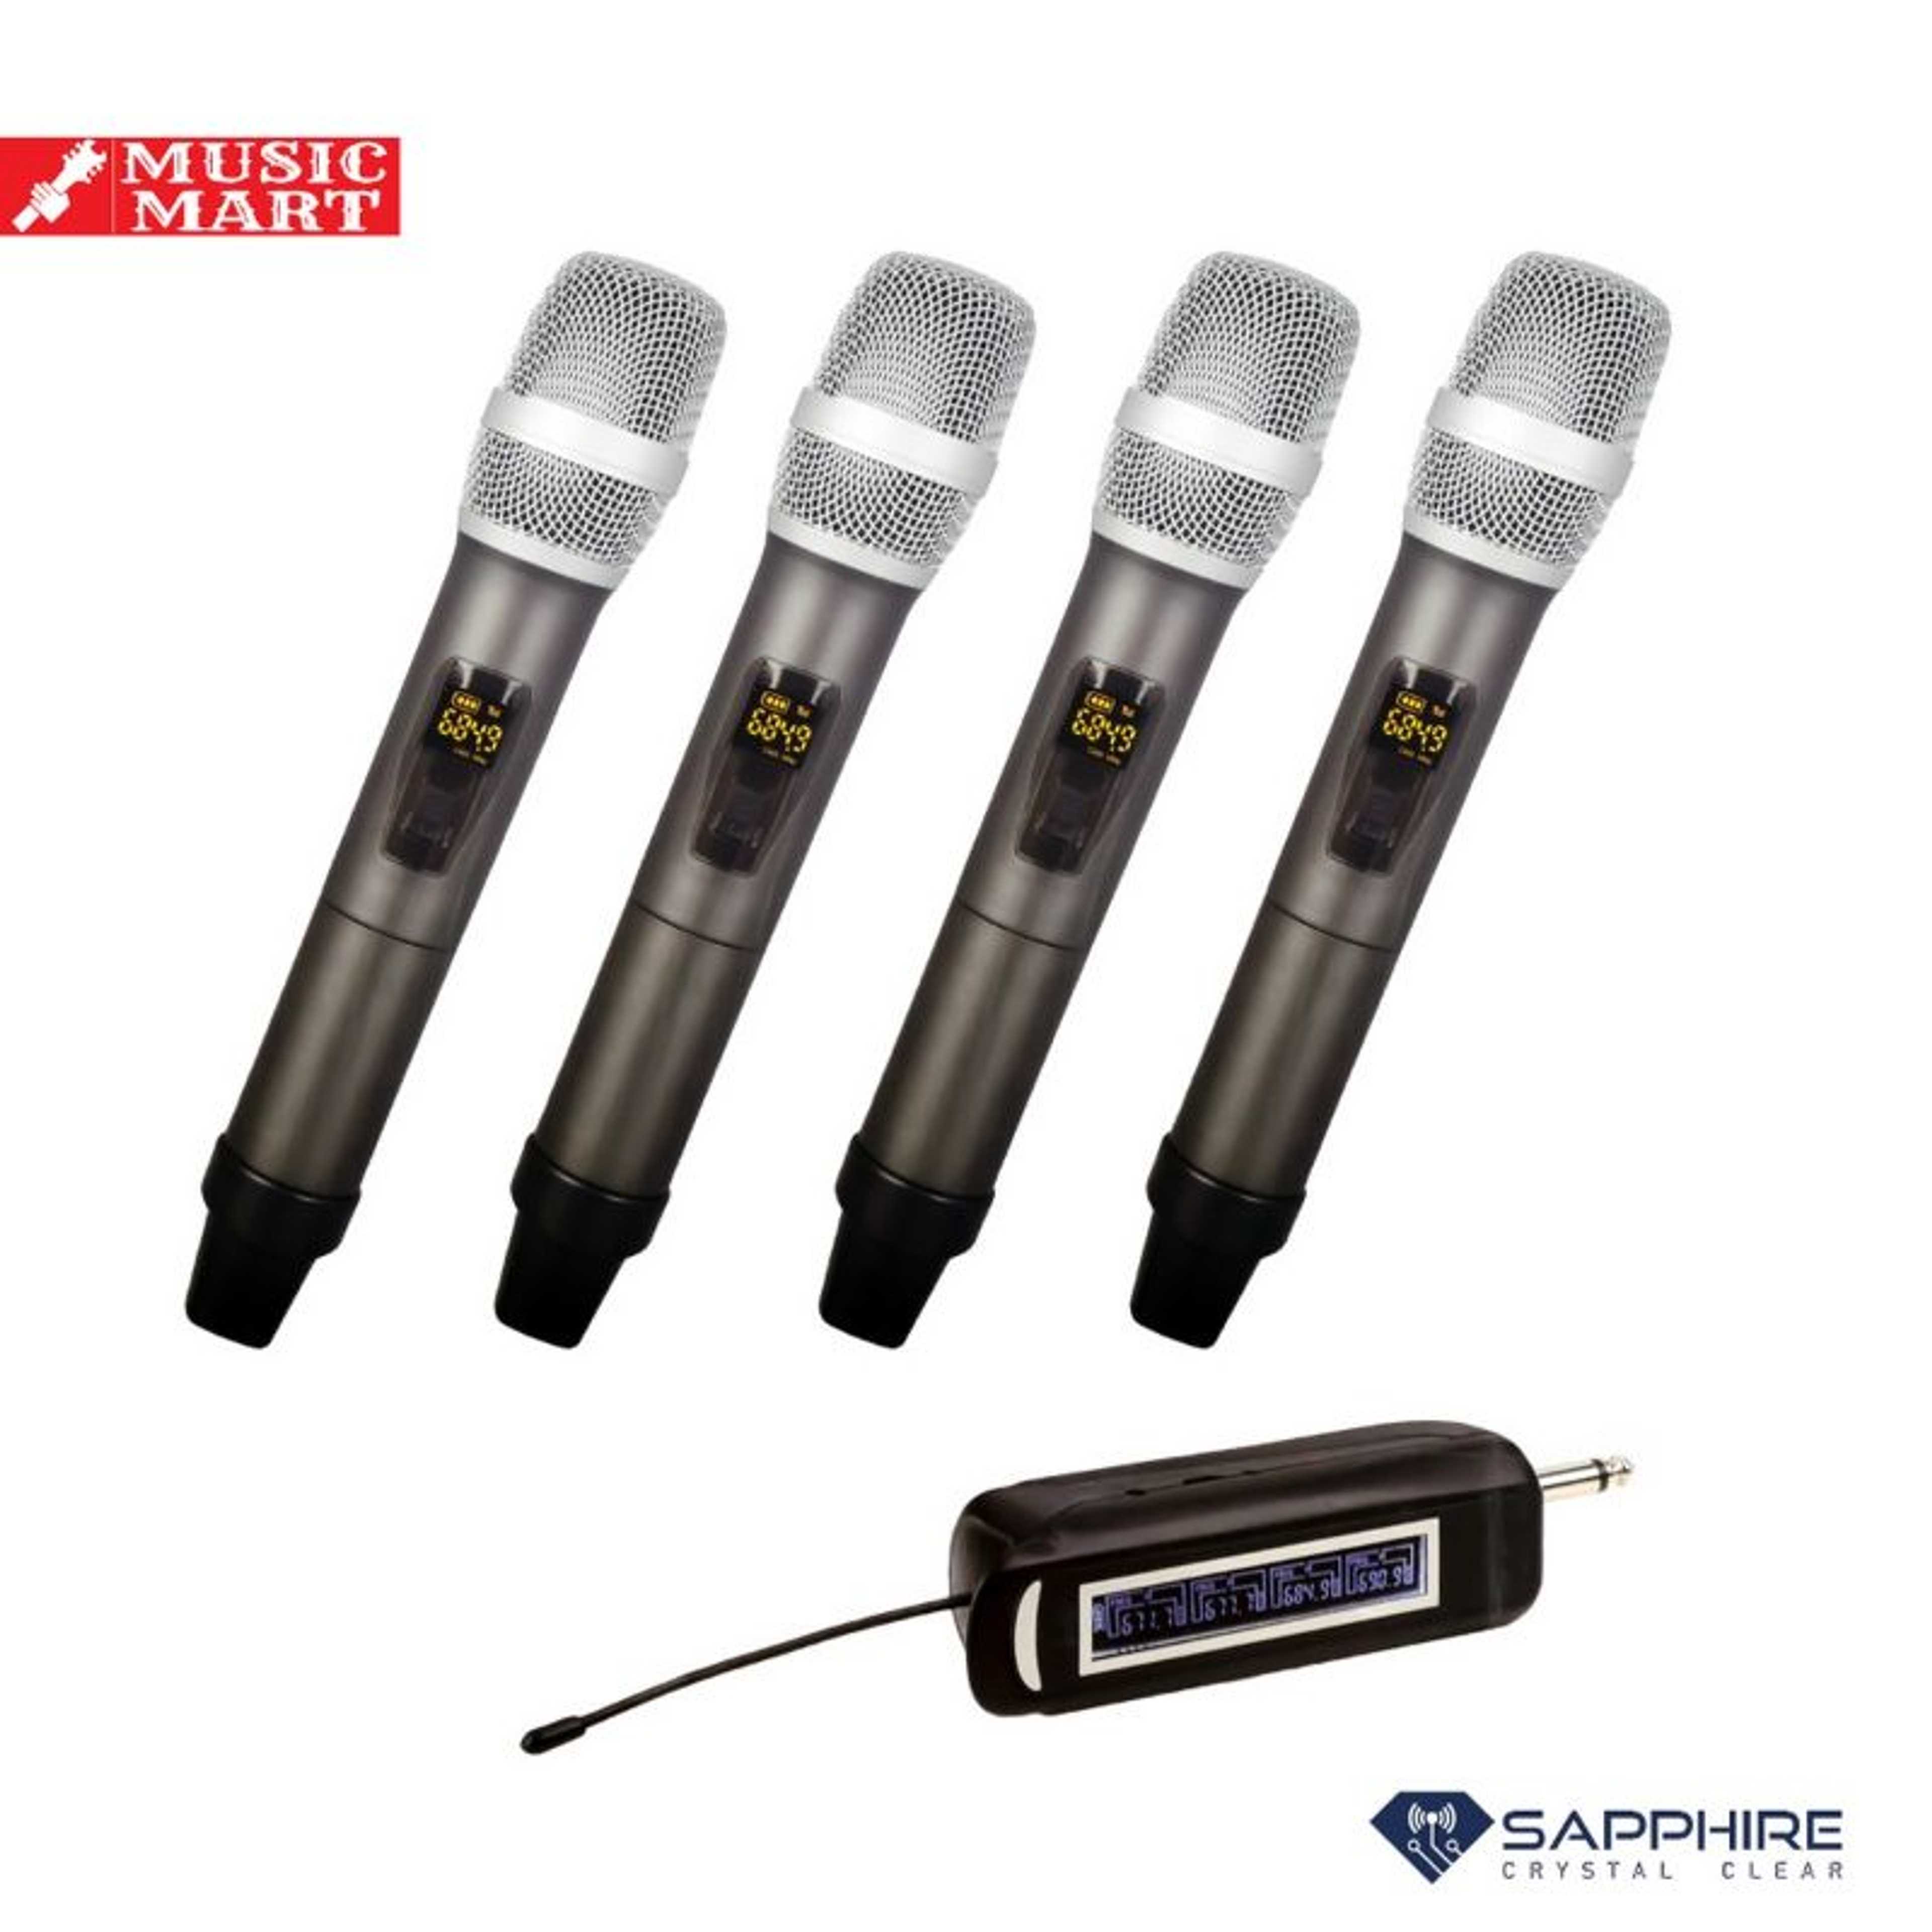 4 MICROPHONES QUAD CHANNEL PORTABLE WIRELESS SYSTEM -  HIGH FREQUENCY - EASY TO USE JUST PLUG AND PLAY - PRECISE QUALITY - CRYSTAL CLEAR SOUND QUALITY - EXCELLENT REPRODUCTION OF VOICE AND MUSIC